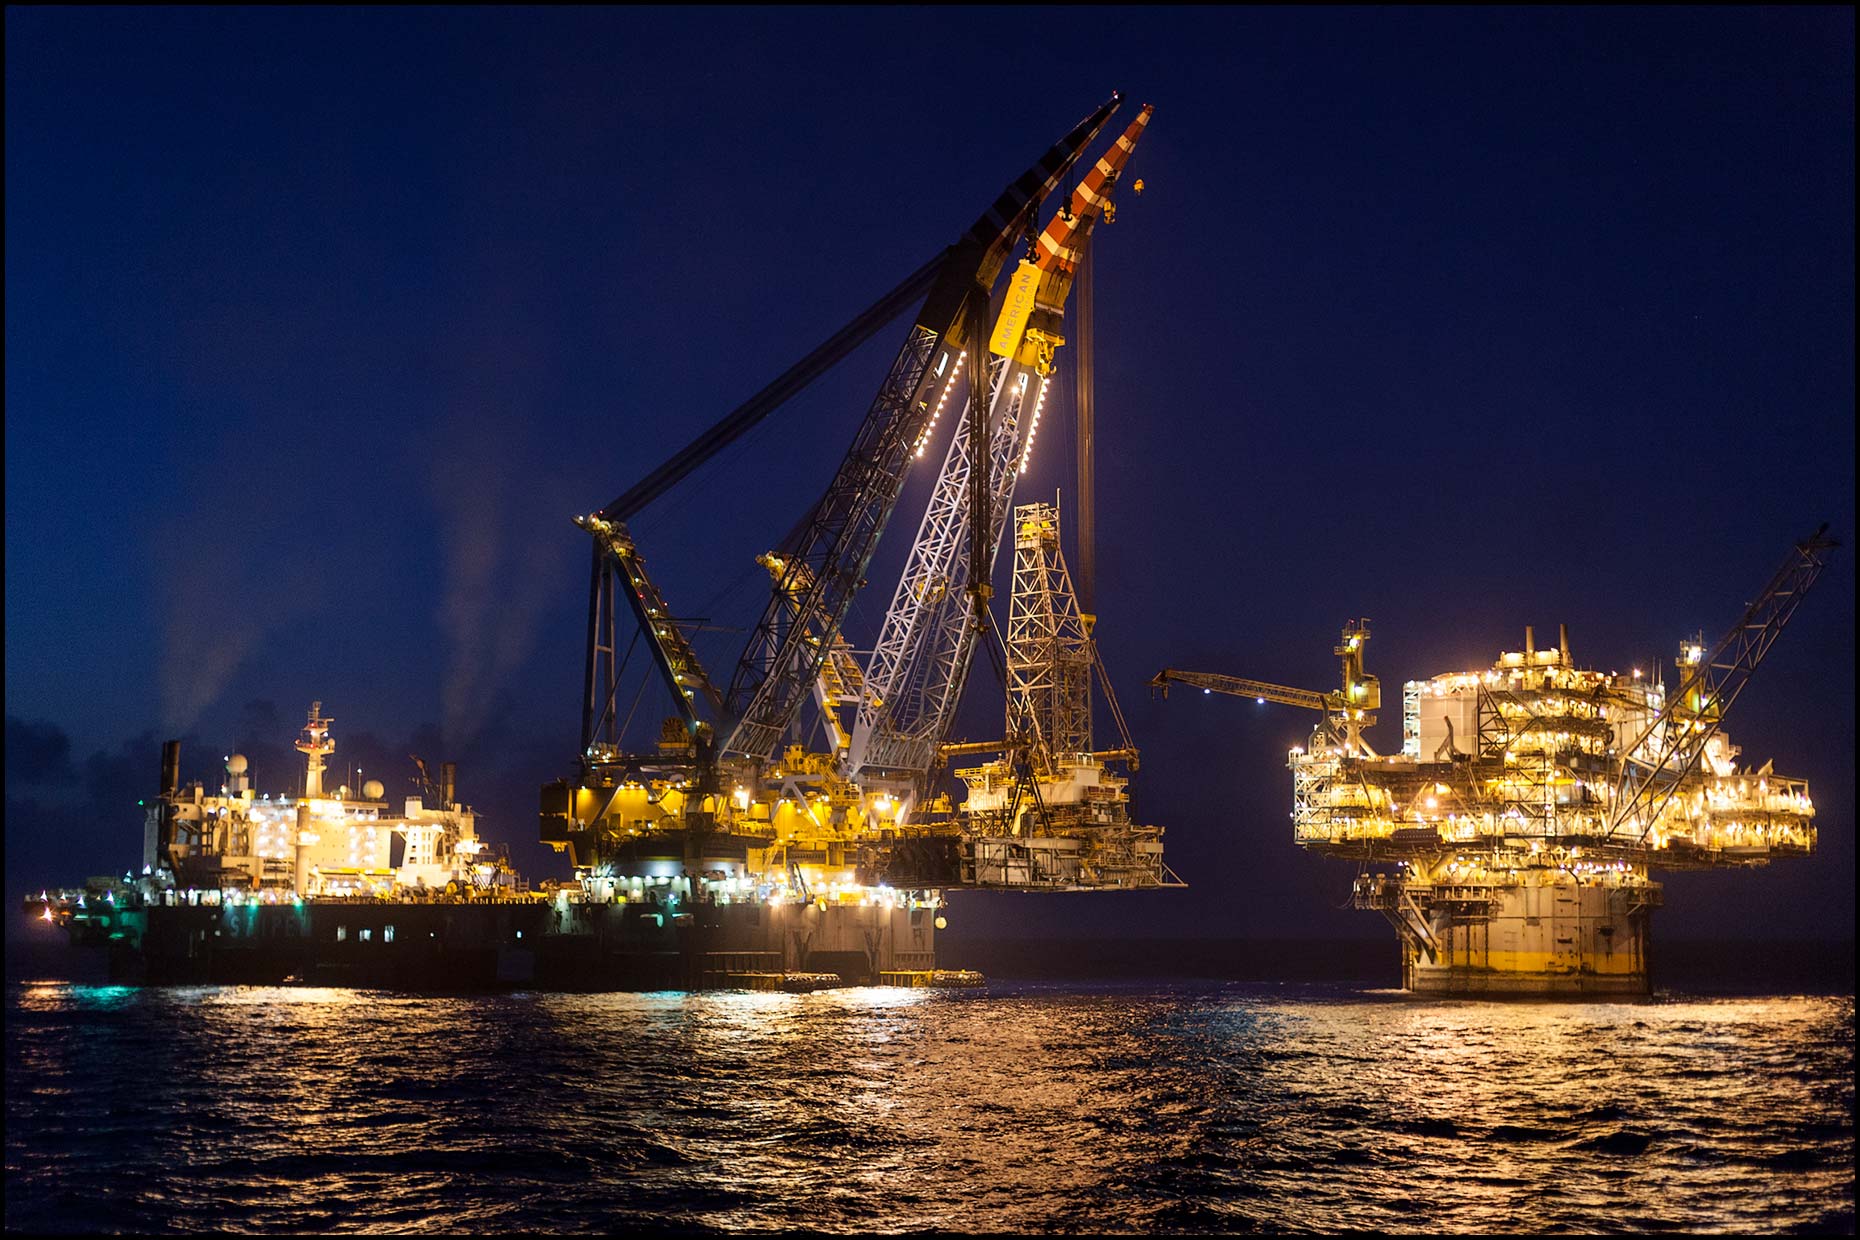 A construction ship lifts a drilling module onto spar rig structure at night.